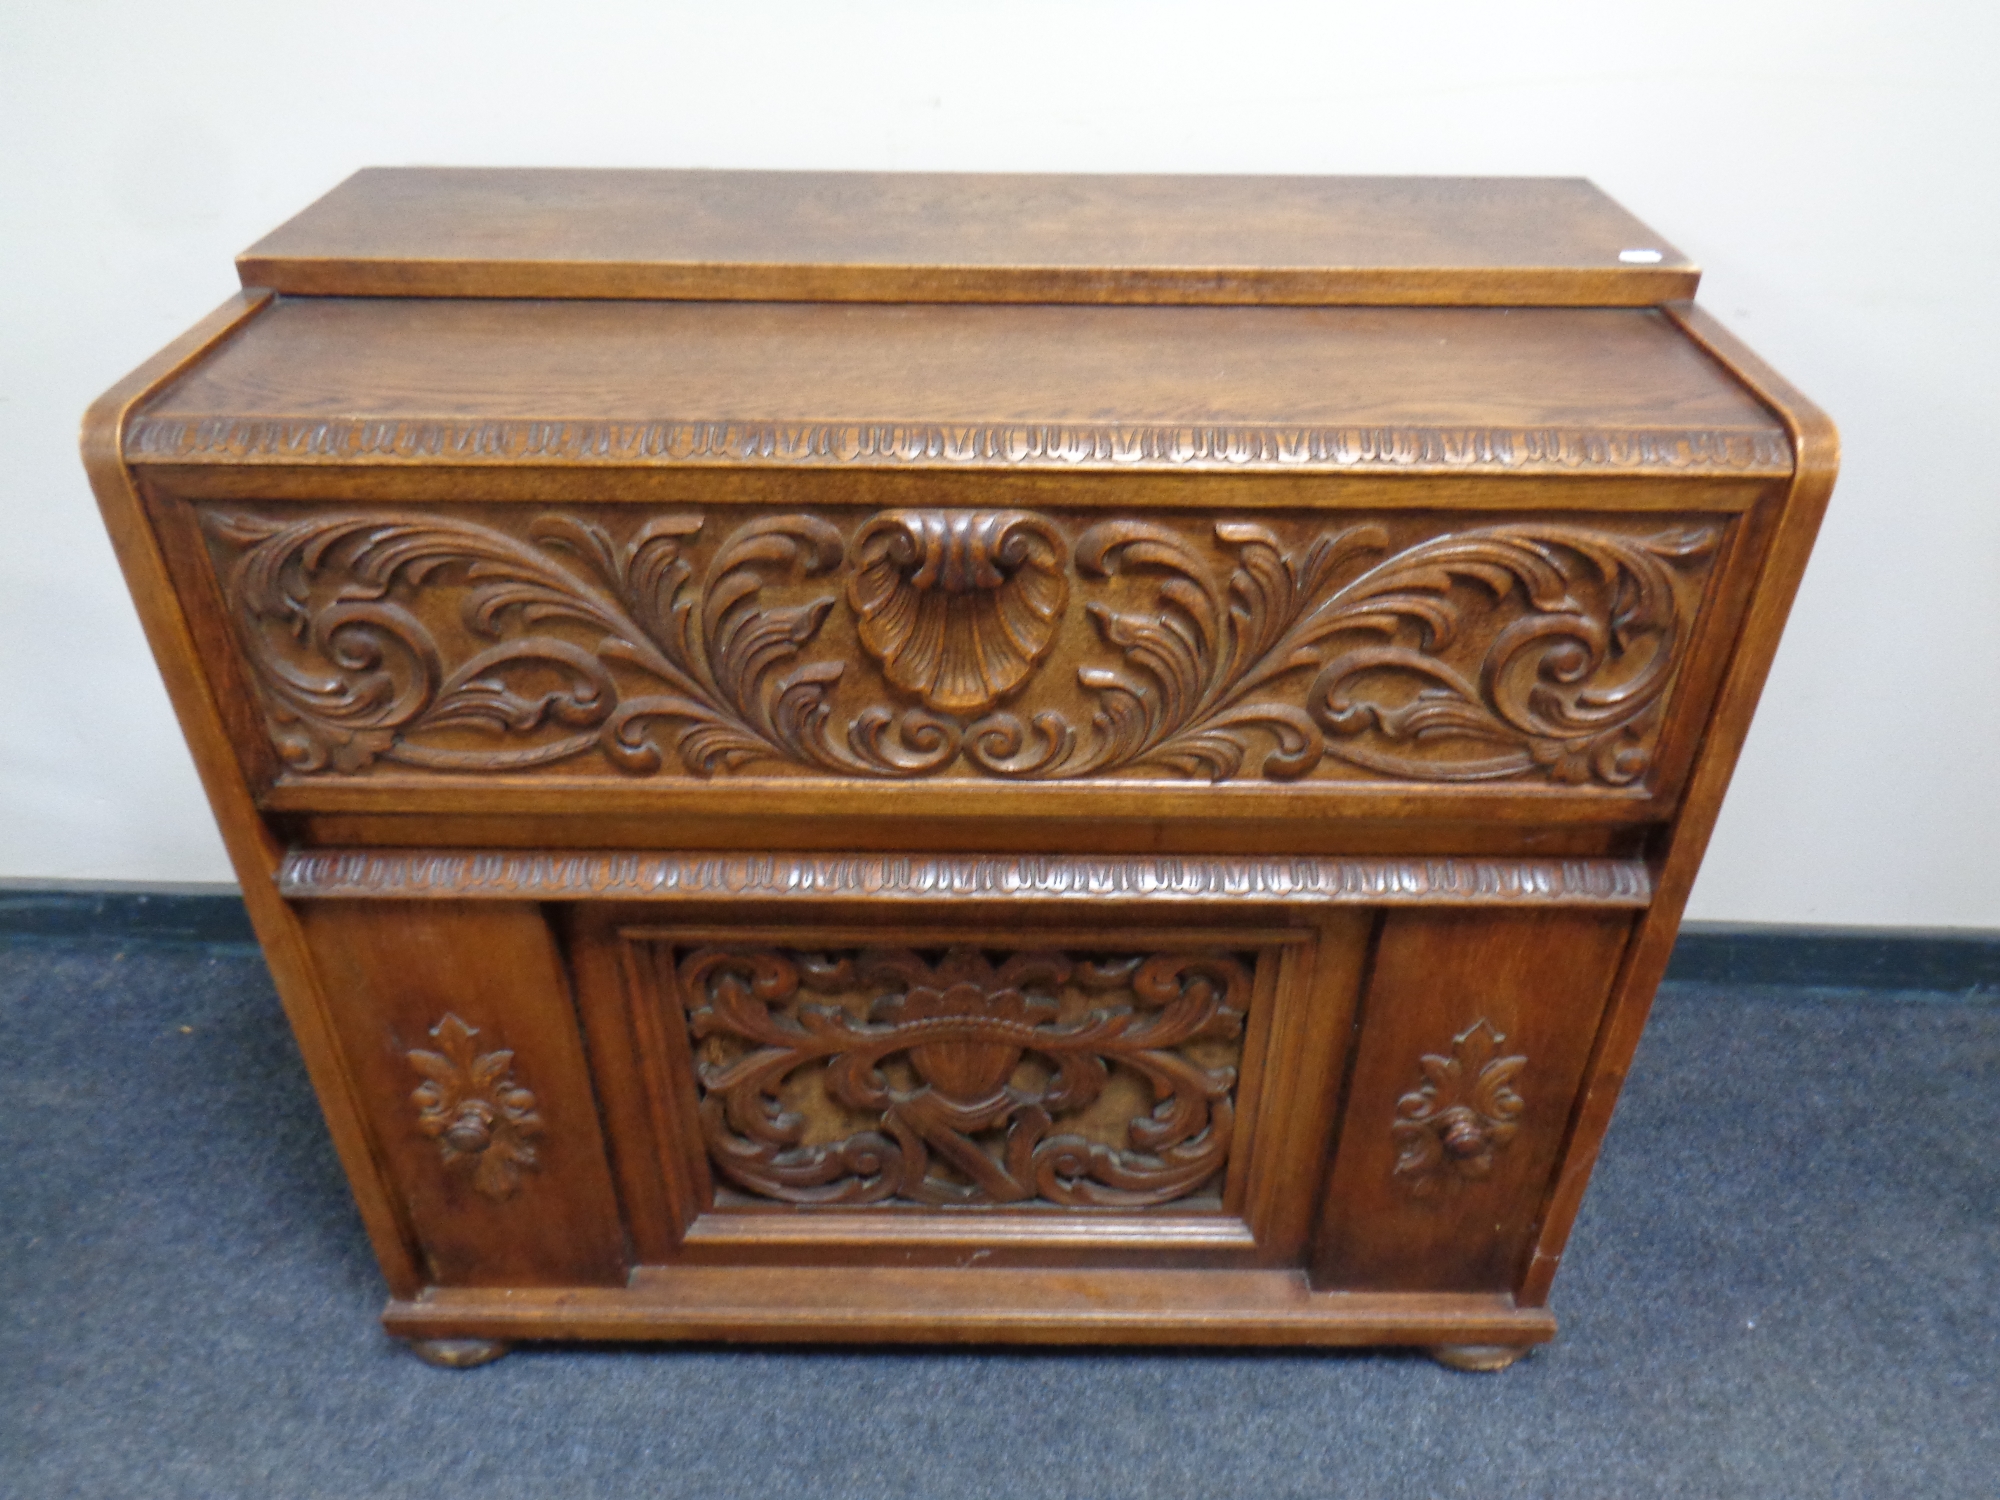 A 20th century carved oak radiogram cabinet